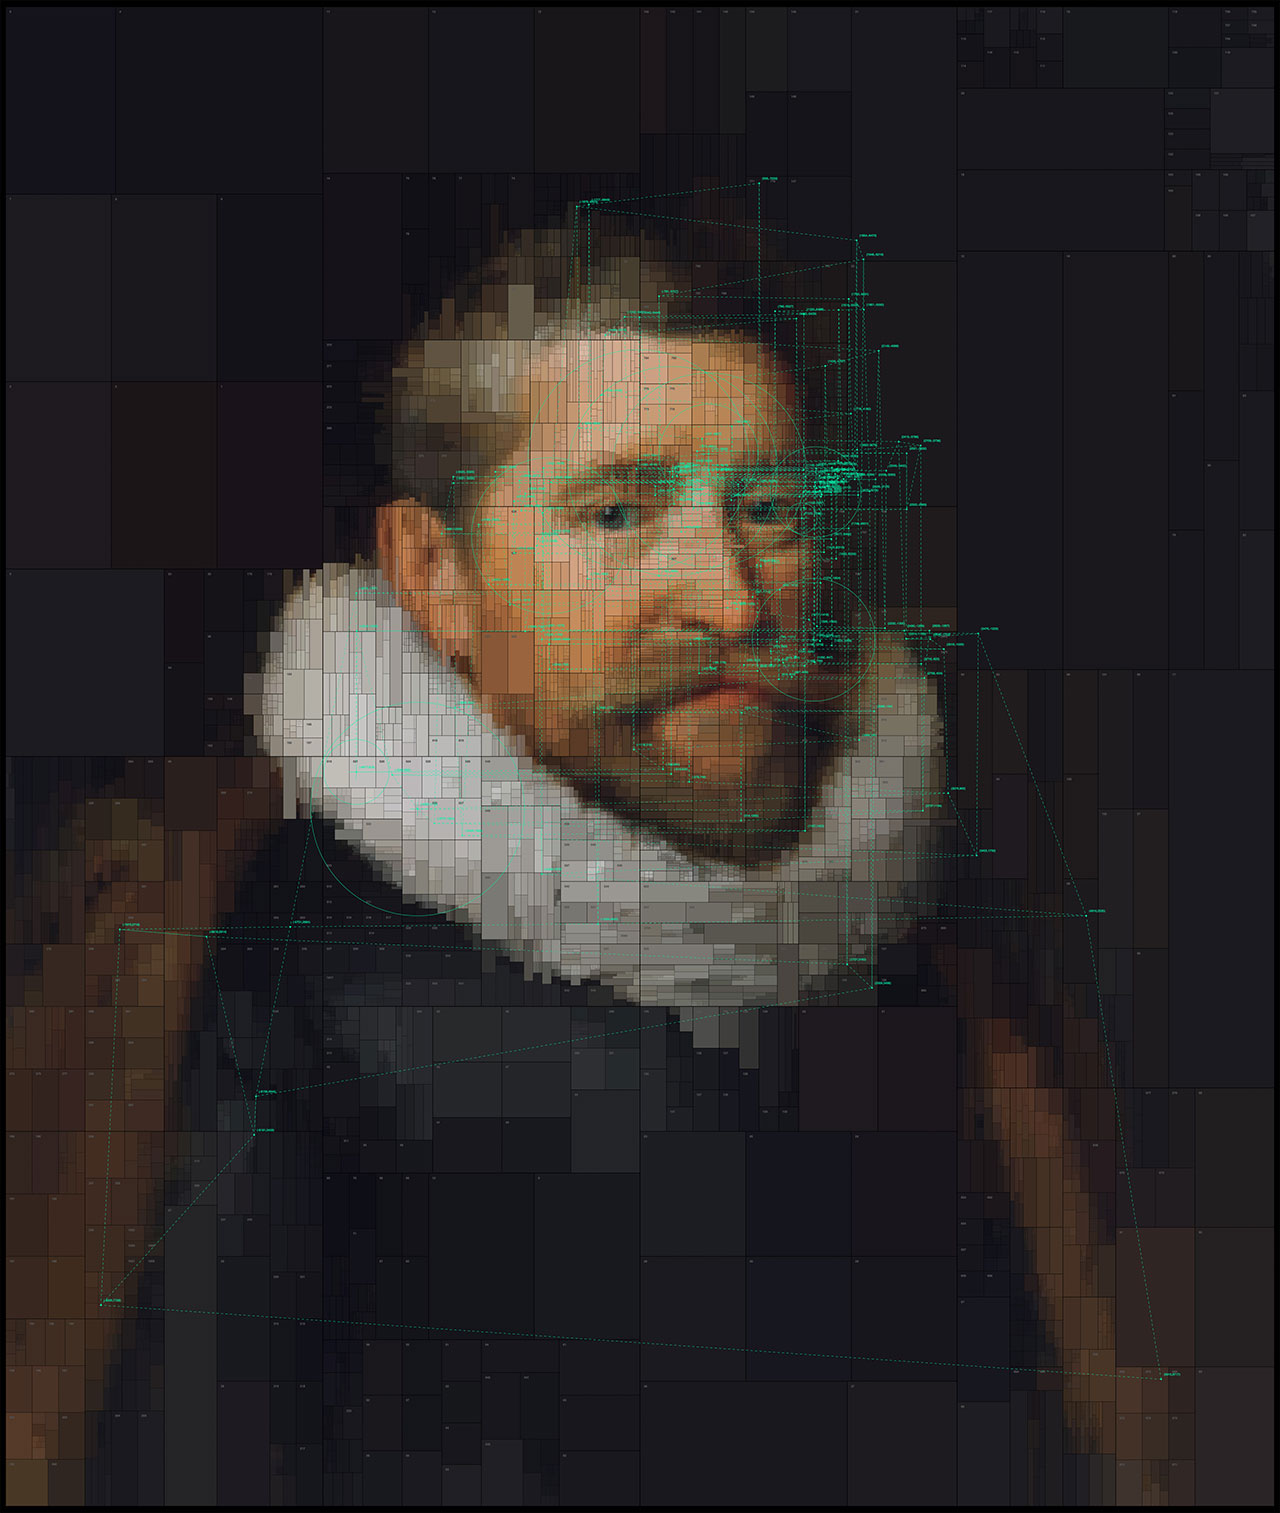 Sir Henry Wotton, from Portraits series by Dimitris Ladopoulos (Original painting by Michiel Janszoon van Mierevelt, 1620).